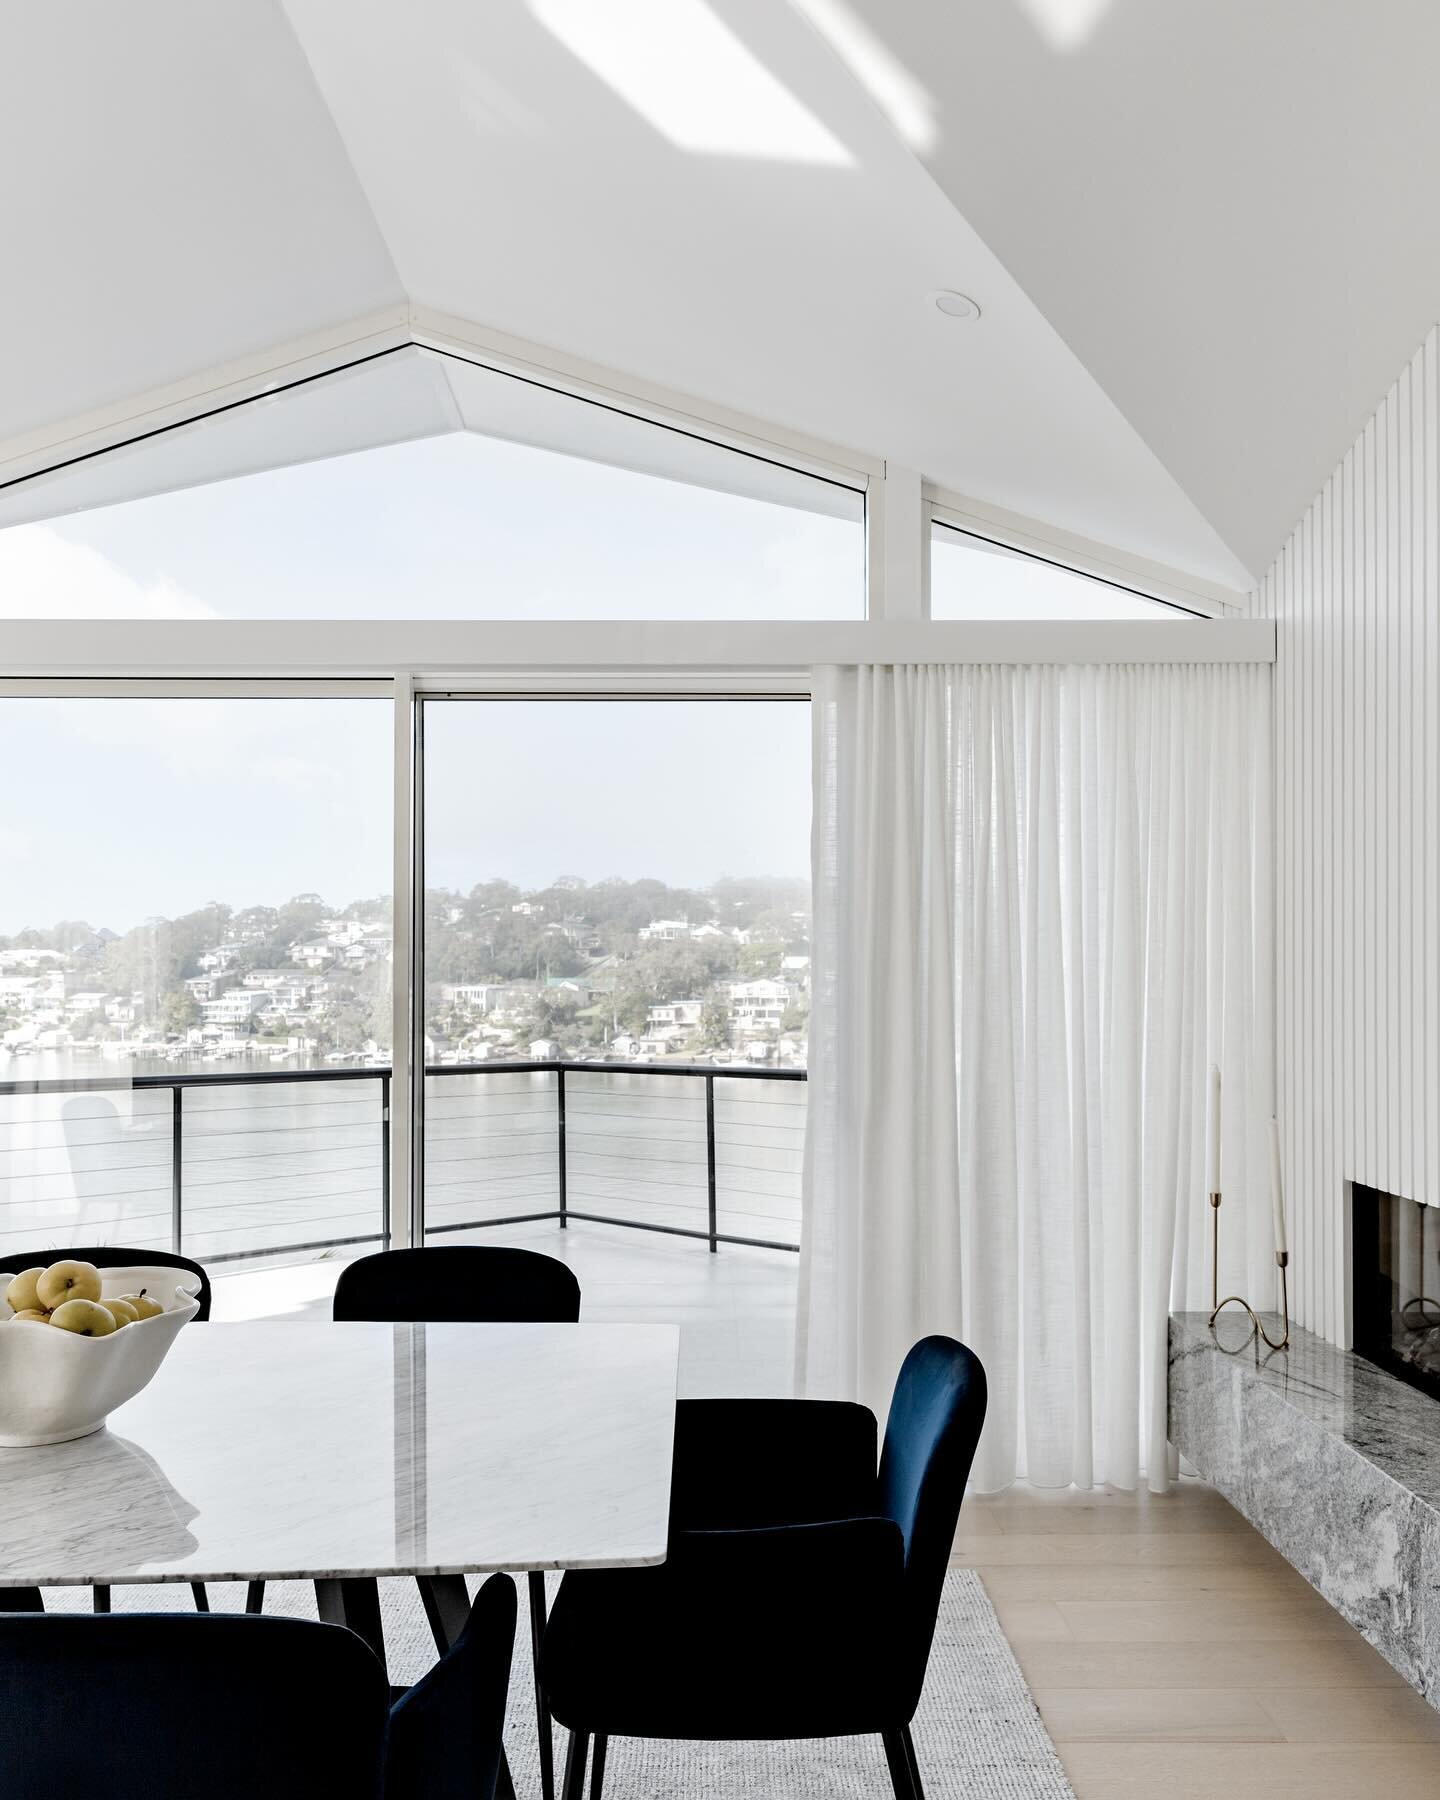 ALGERNON &bull; Framing these water views with soft window furnishings was the icing on the cake for in this open plan dining space #InnovateInteriors